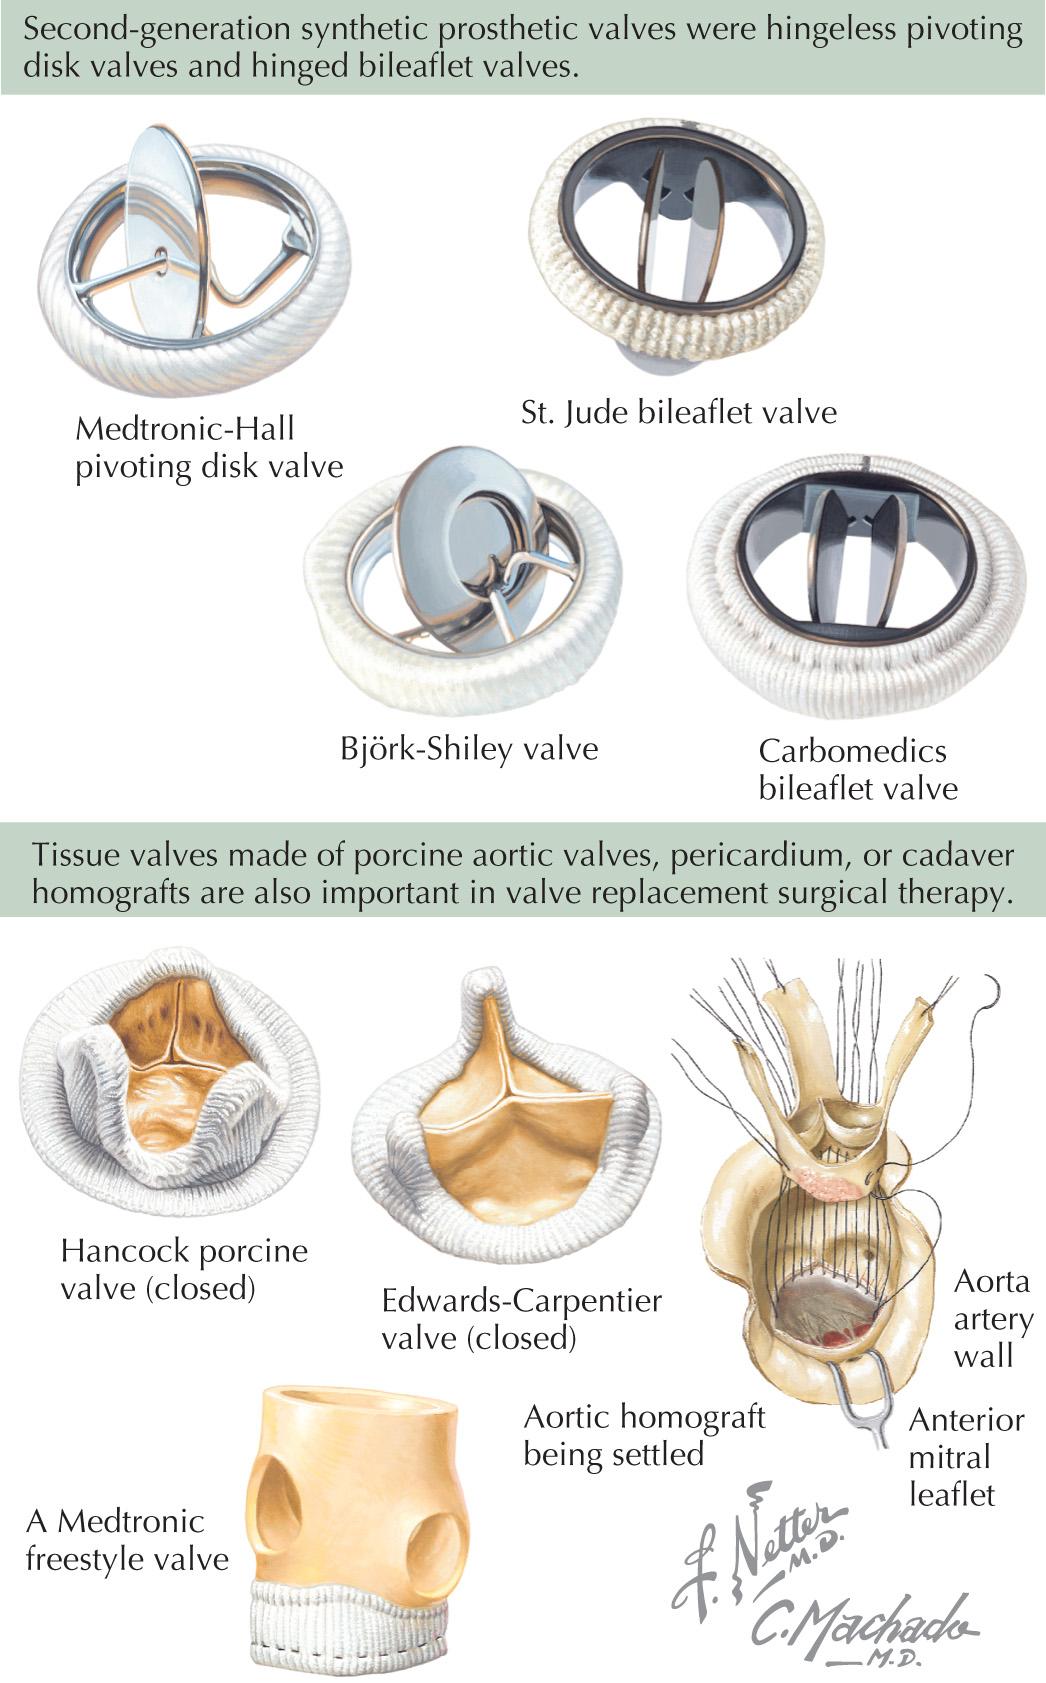 FIG 50.1, Second Generation of Synthetic Prosthetic Valves and Biological Valves.